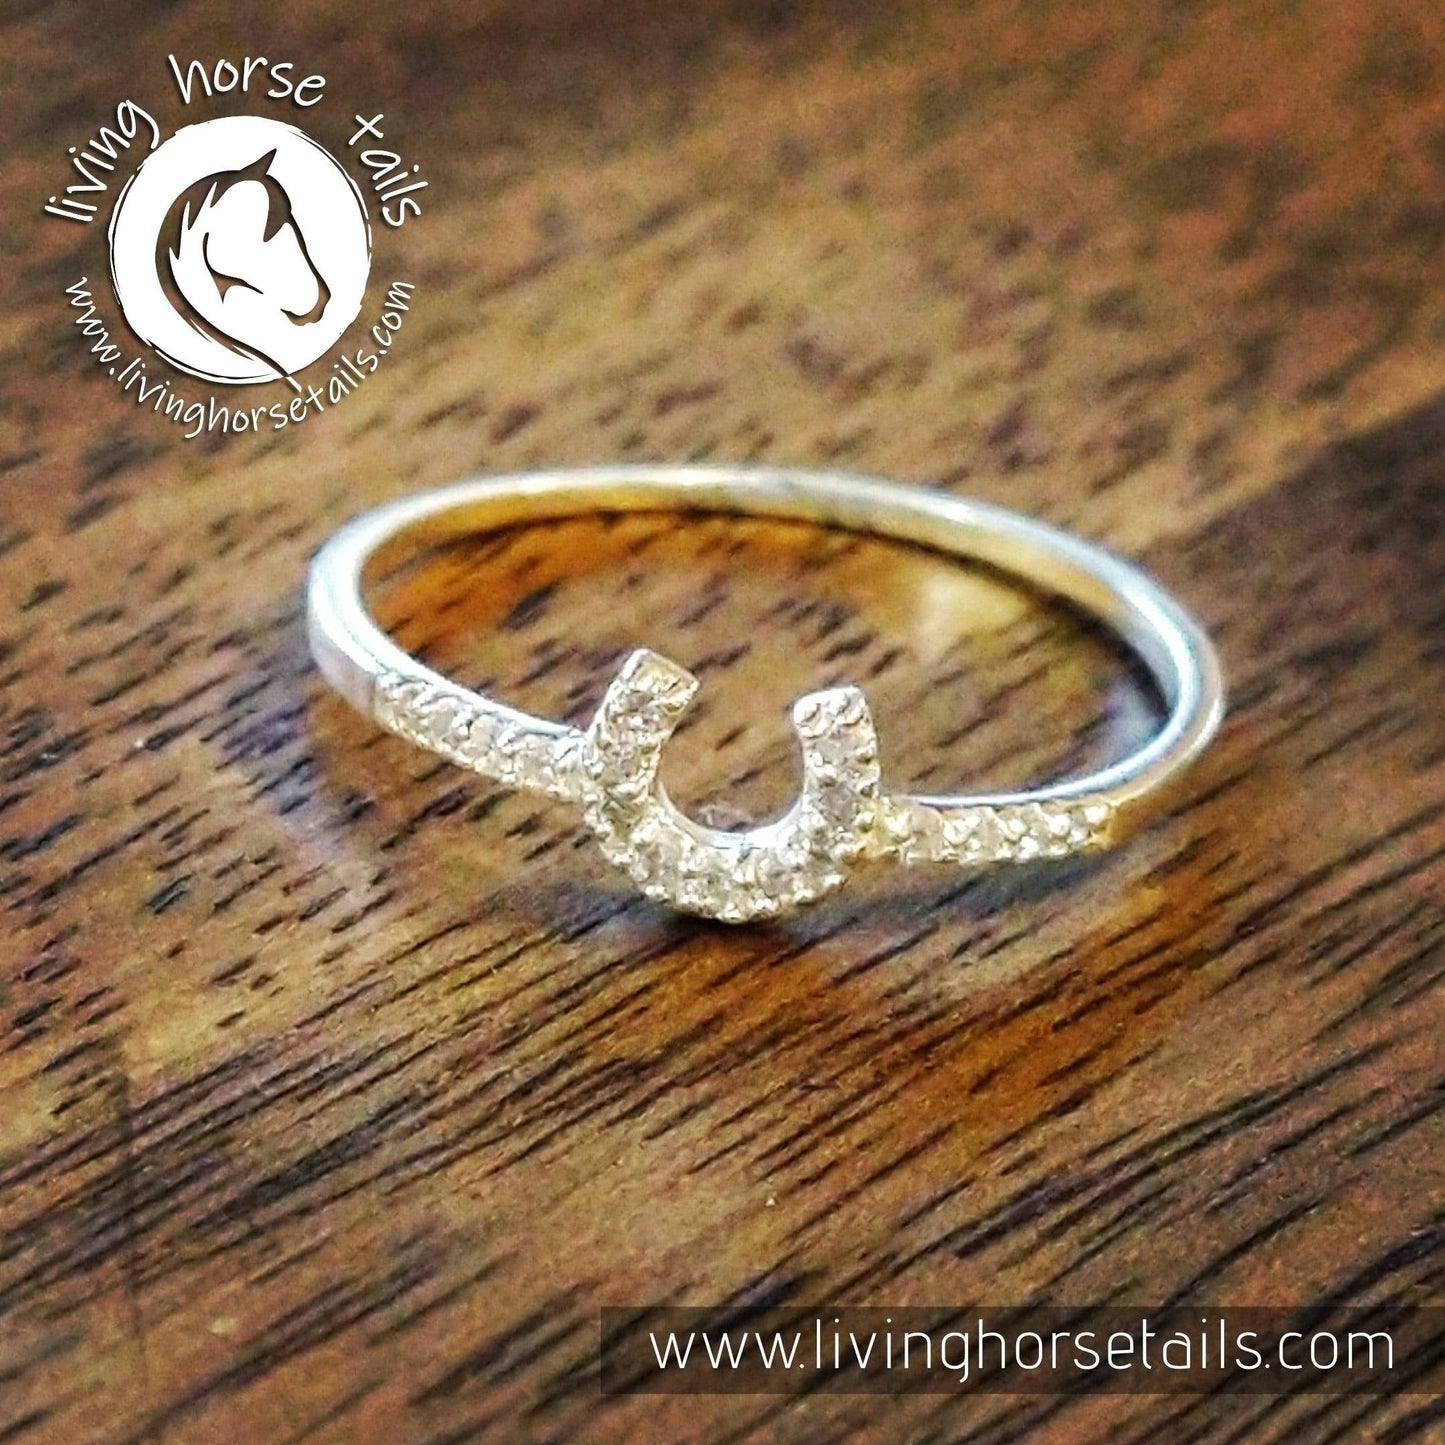 Load image into Gallery viewer, Sterling Silver Horseshoe and Cubic Zirconia Ring Living Horse Tails Handmade Jewellery Custom Horse Hair Keepsakes Australia
